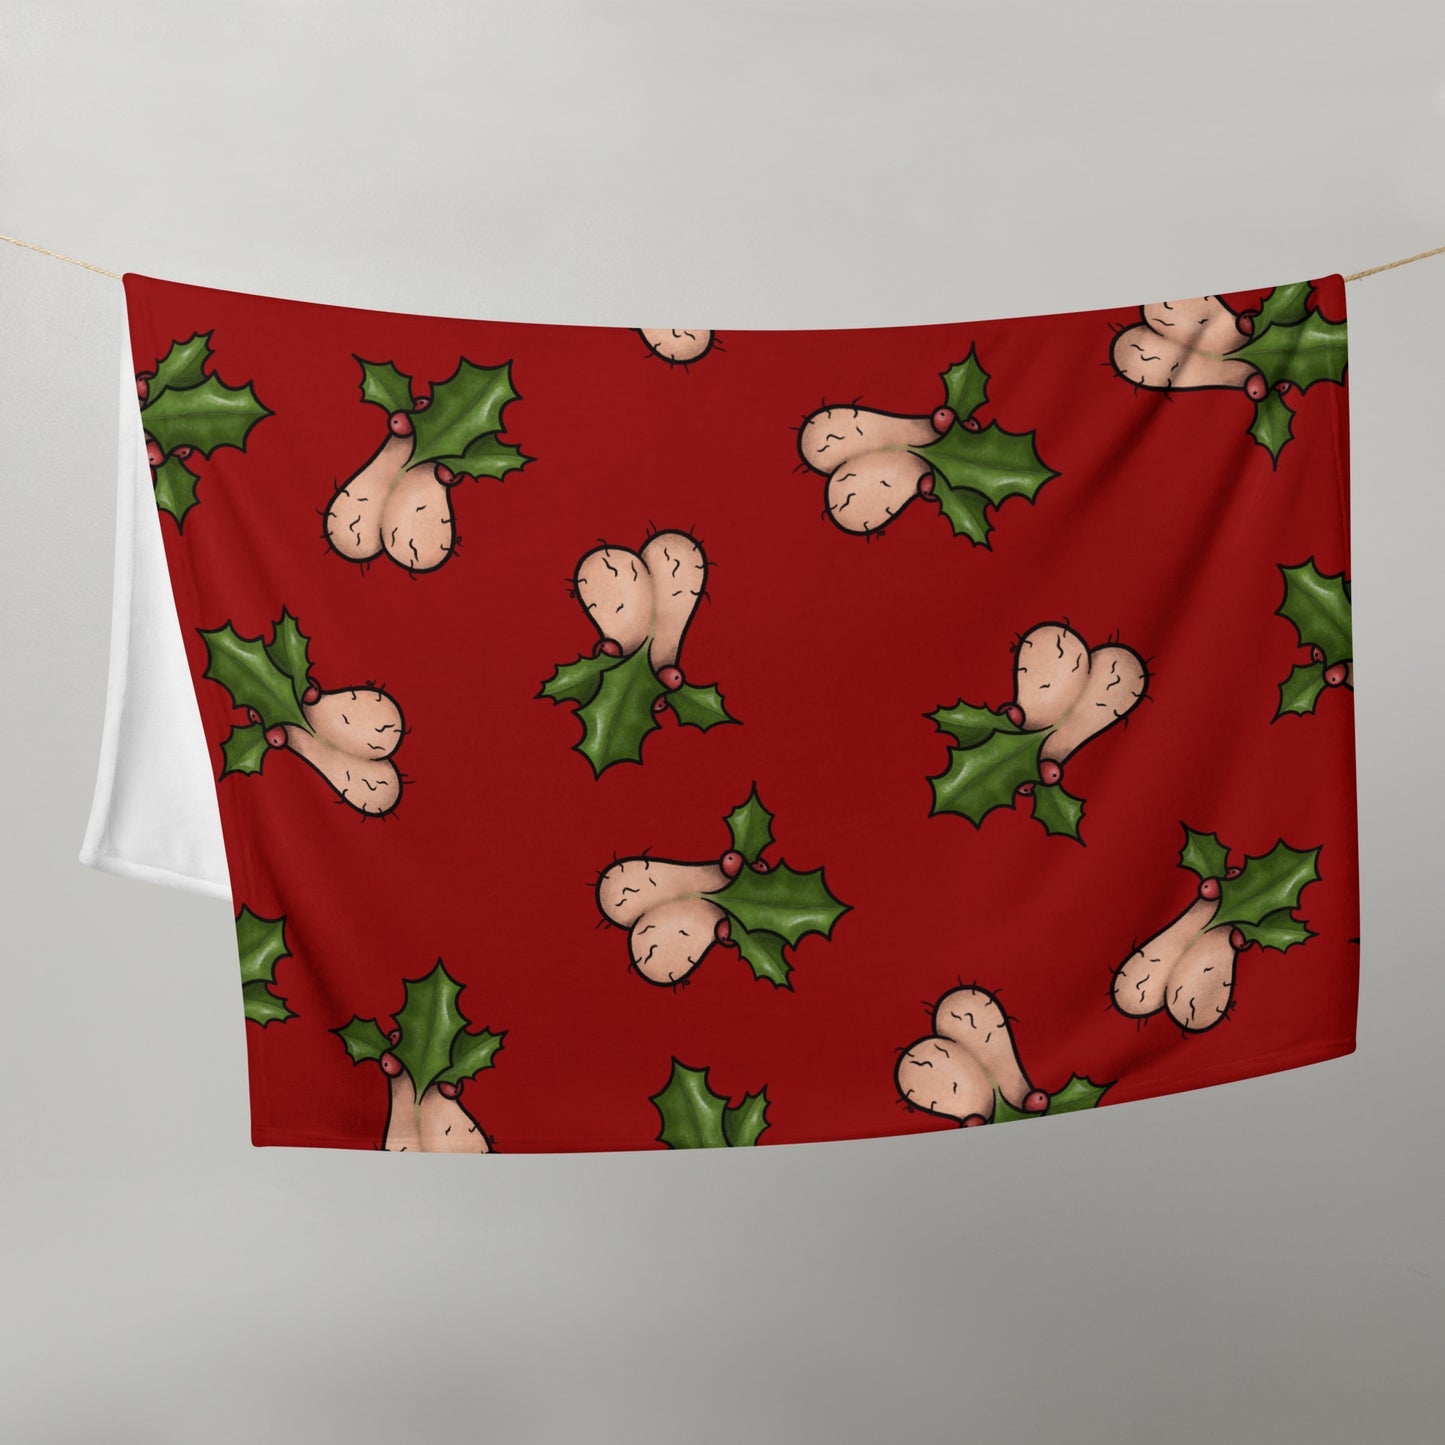 image of Jingle Balls blanket hanging in half on a clothes line to show size with repeated pattern image of Christmas testicles with holly and berries on a red background